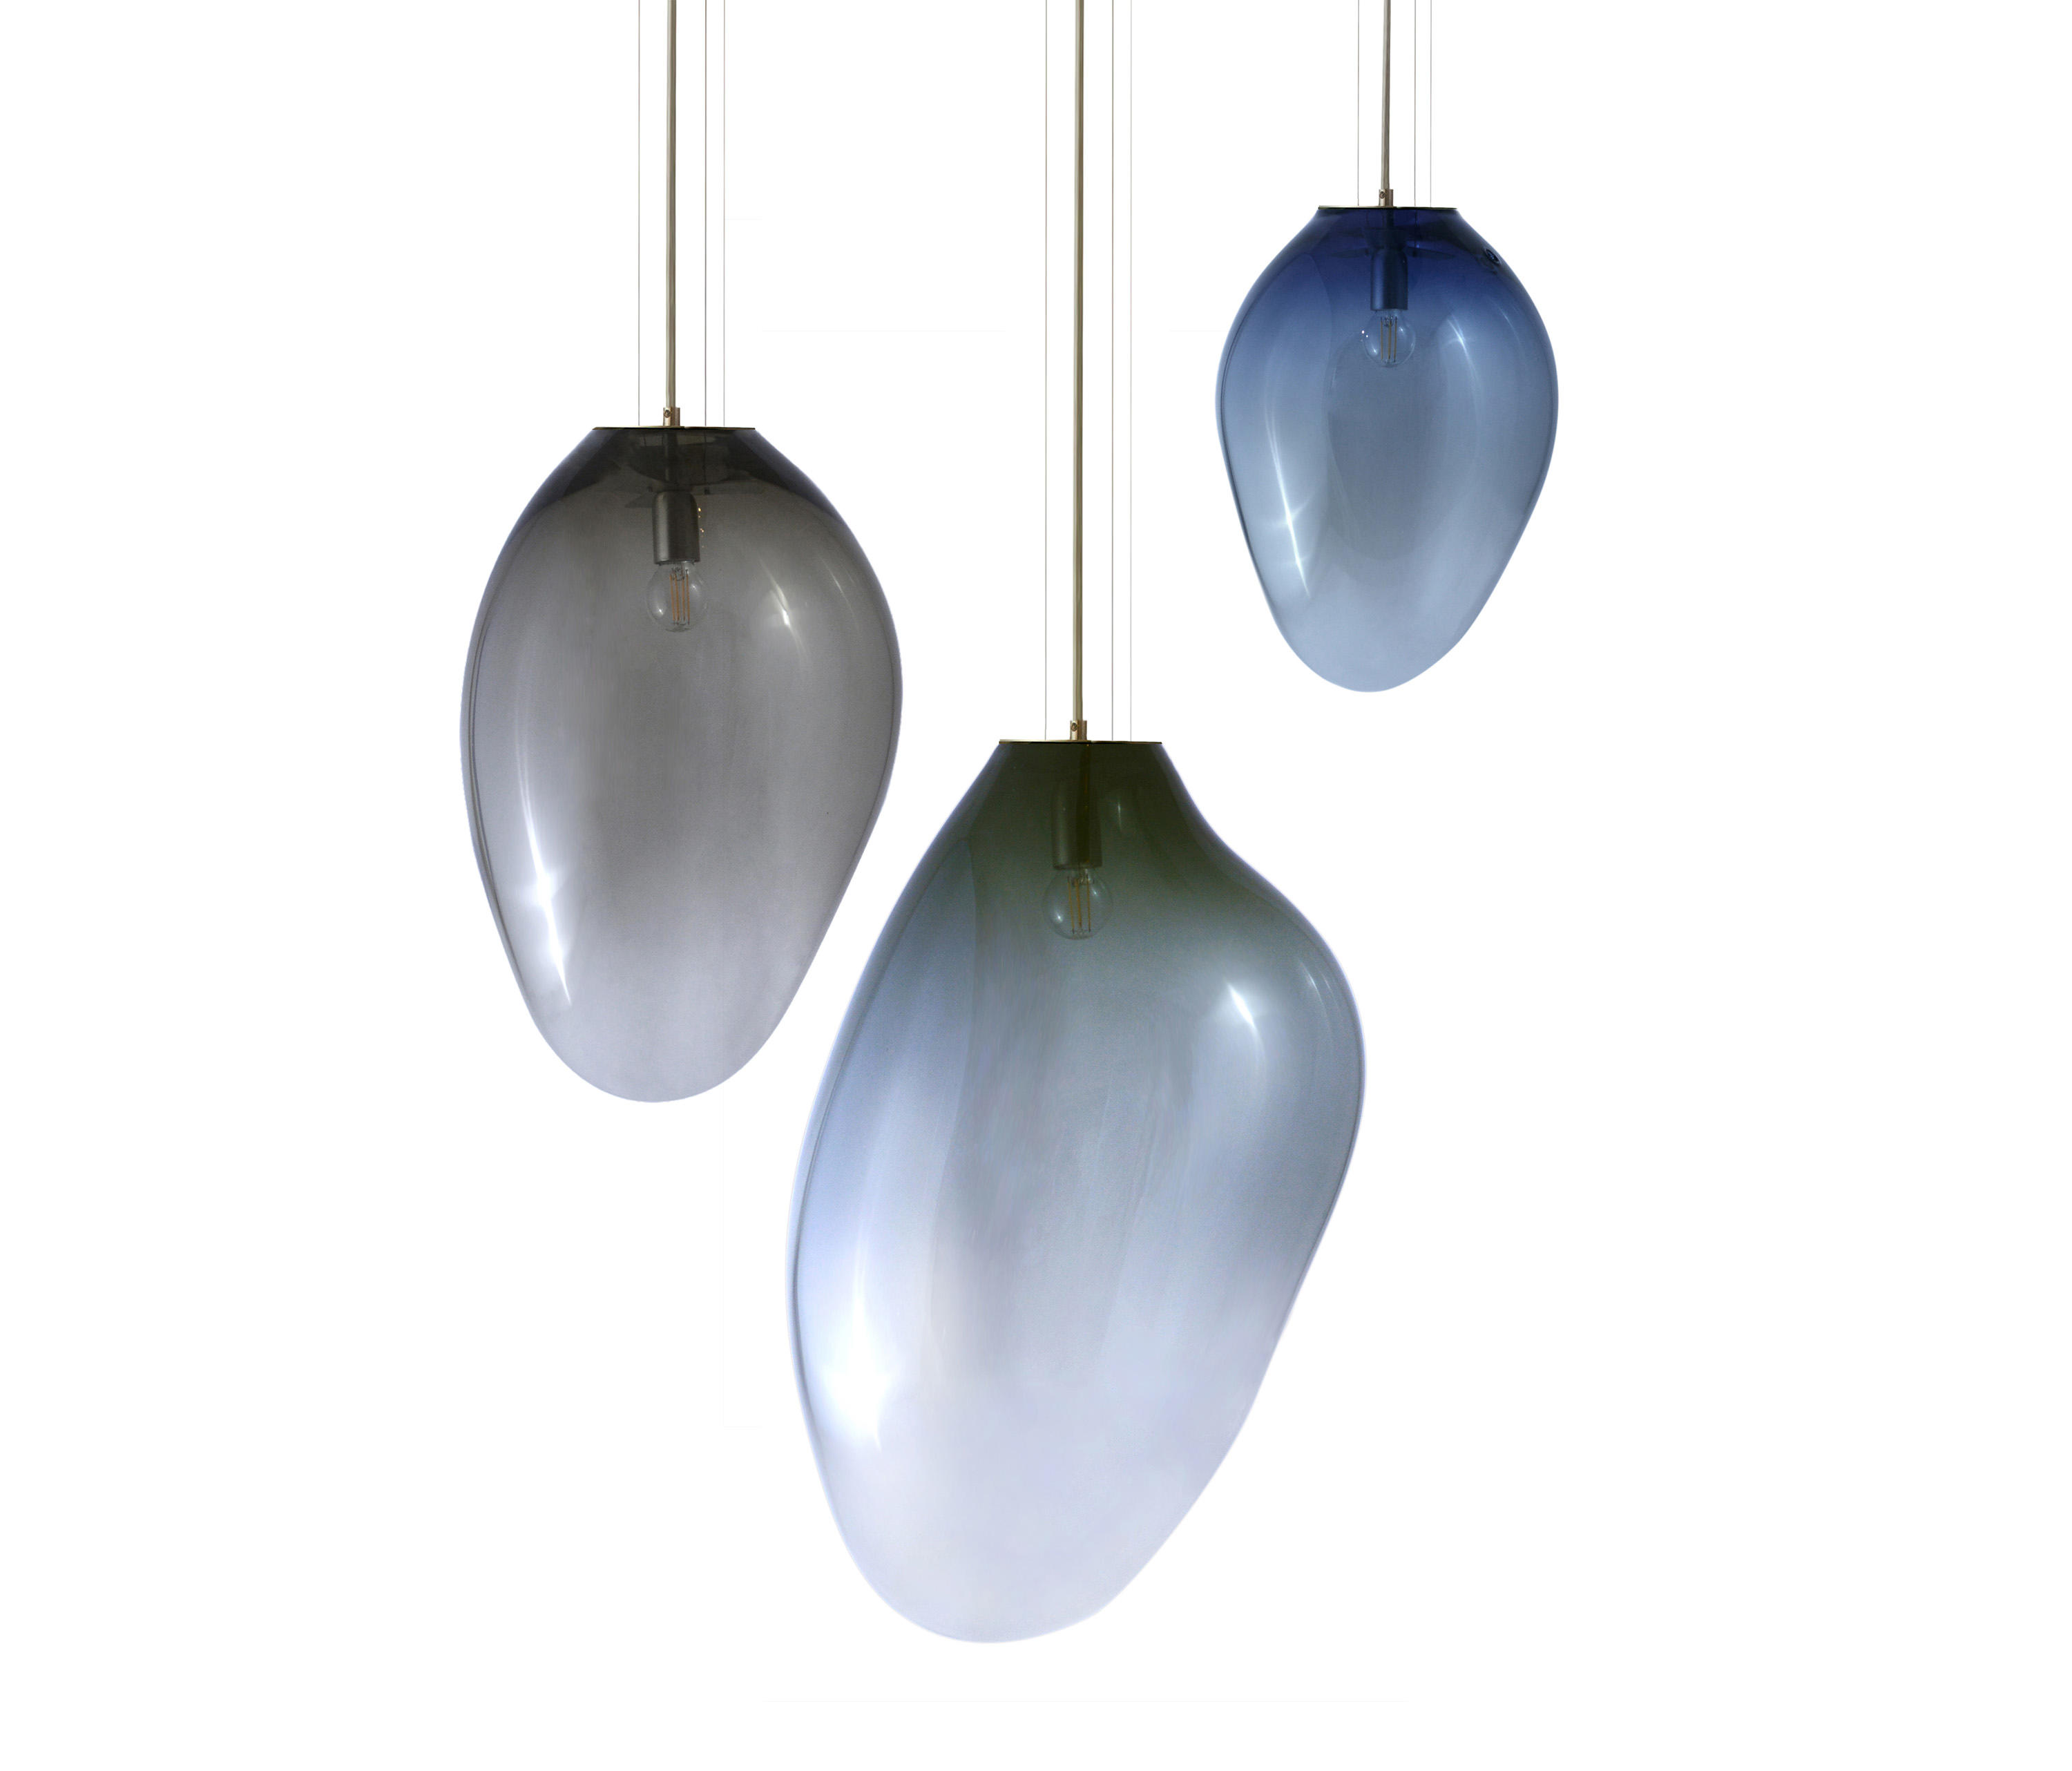 CERES - Suspended lights from ELOA | Architonic